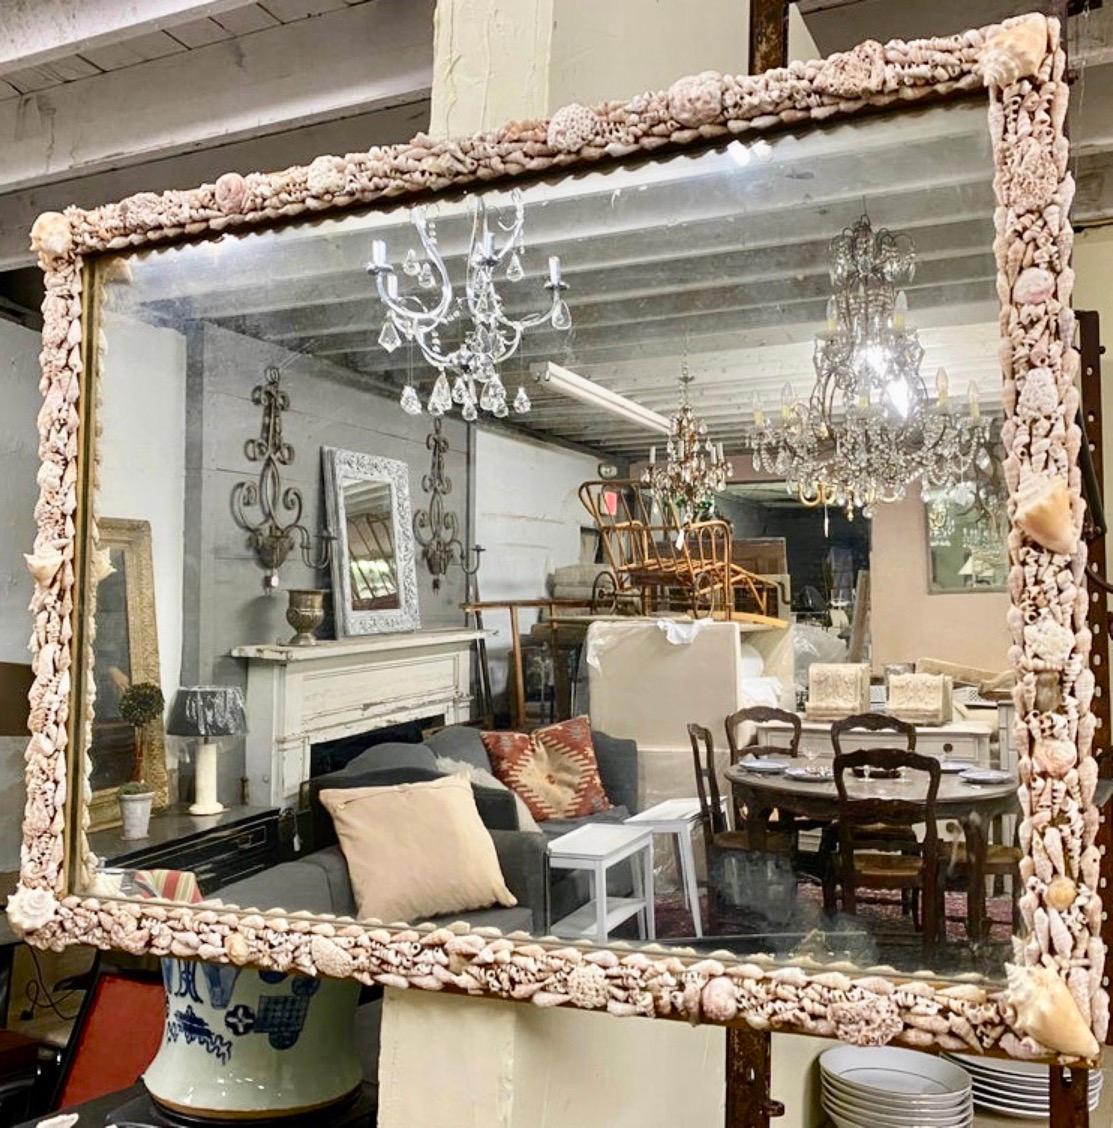 A beautiful rectangular mirror decorated meticulously with collected sea shells. This mirror can be hung vertically or horizontally. Add style and interest to hallway, mantle, powder room with Hollywood Regency or coastal style living.
Mantel